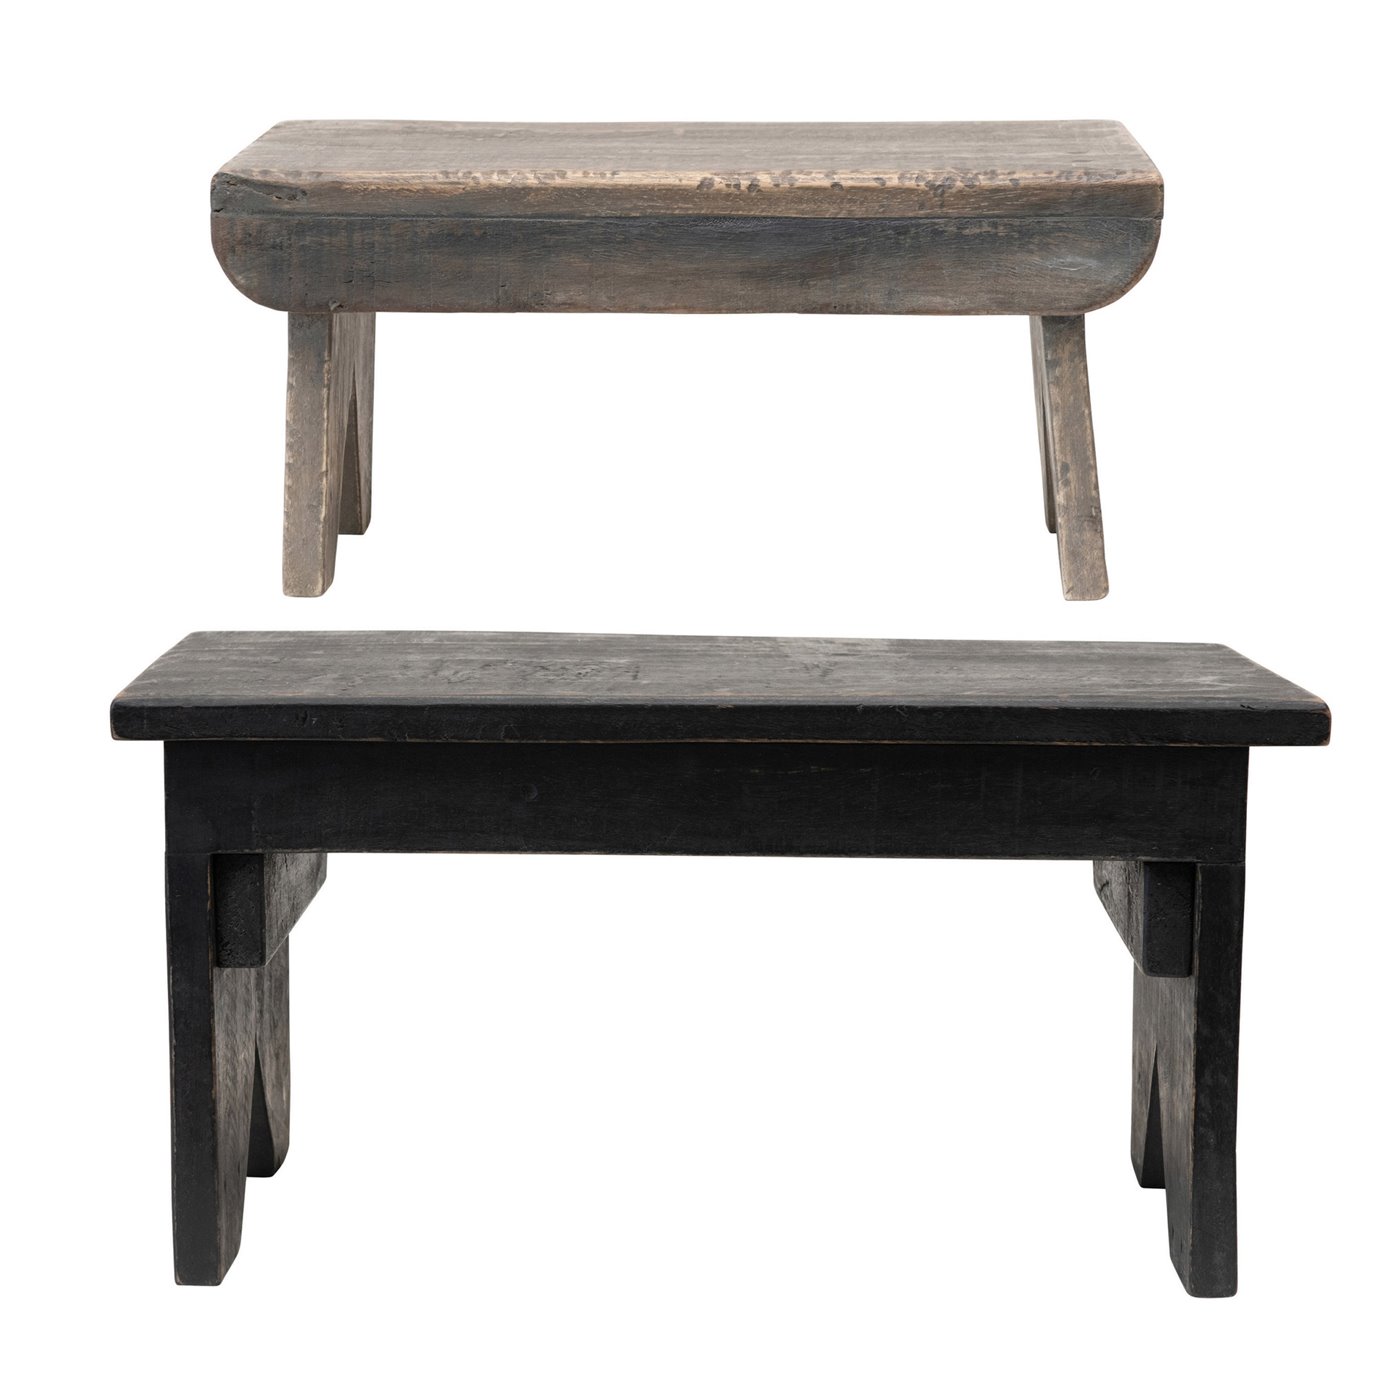 Reclaimed Wood Benches/Risers, Set of 2